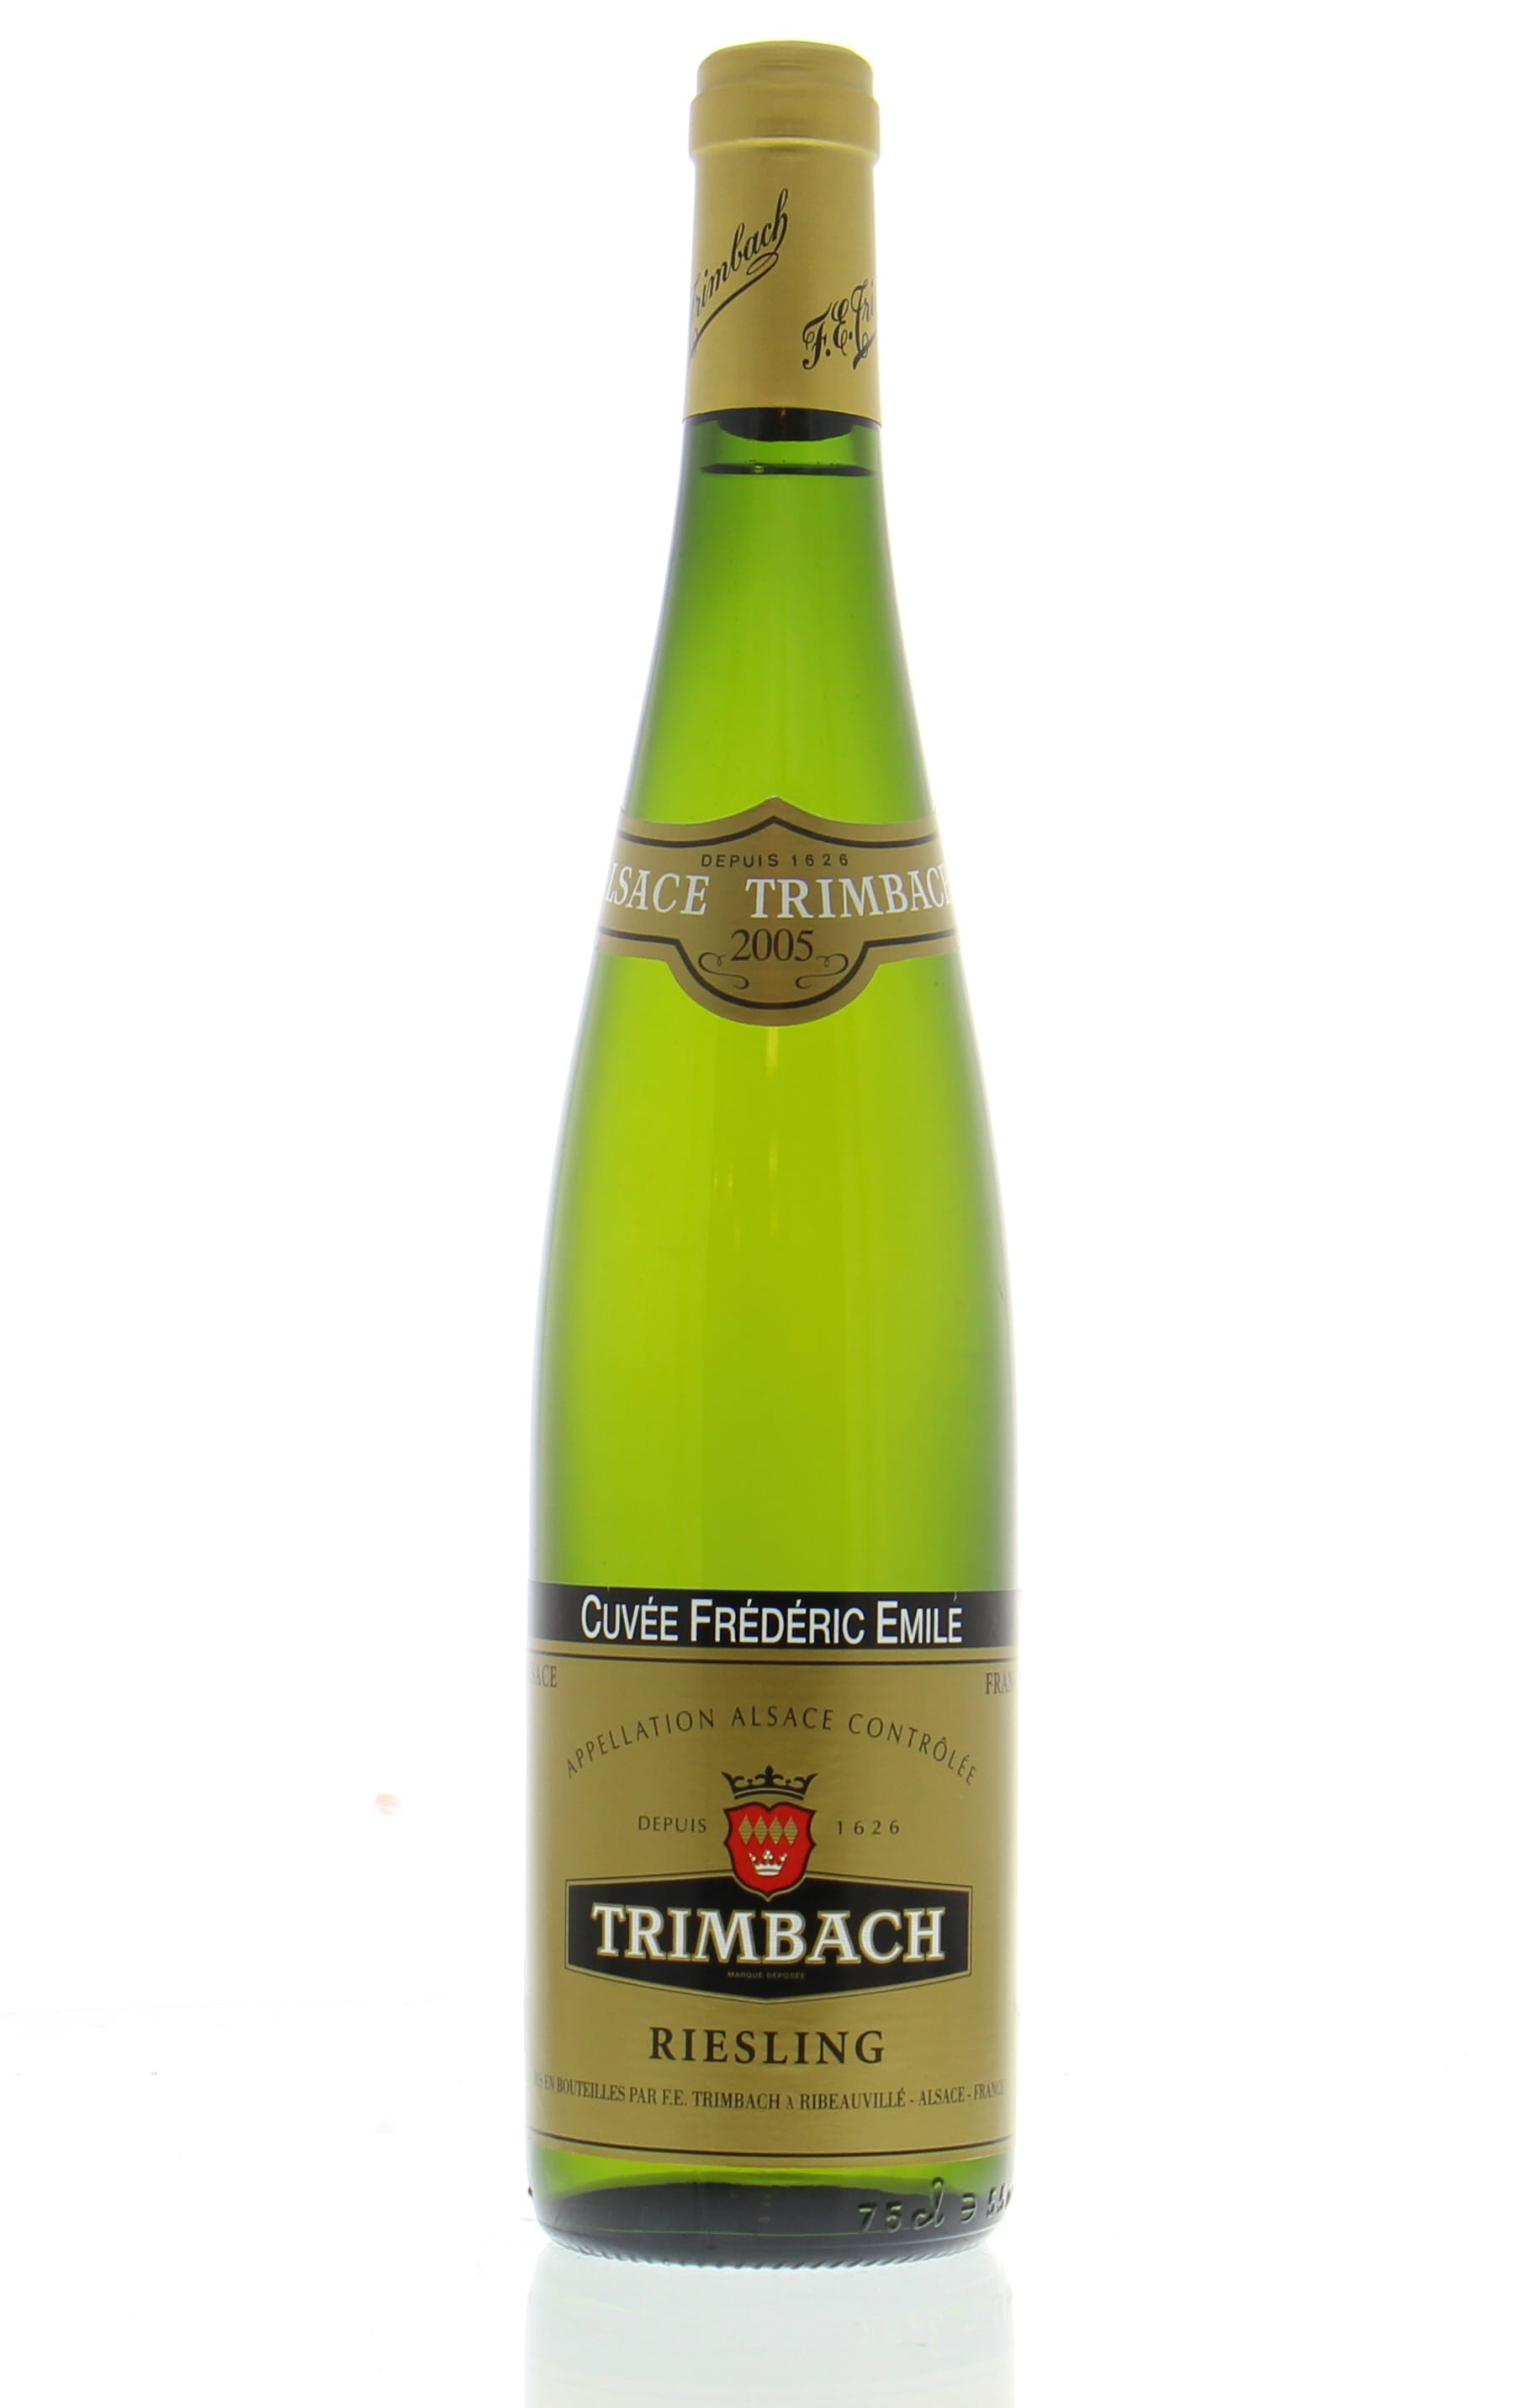 Trimbach - Riesling Cuvee Frederic Emile 2005